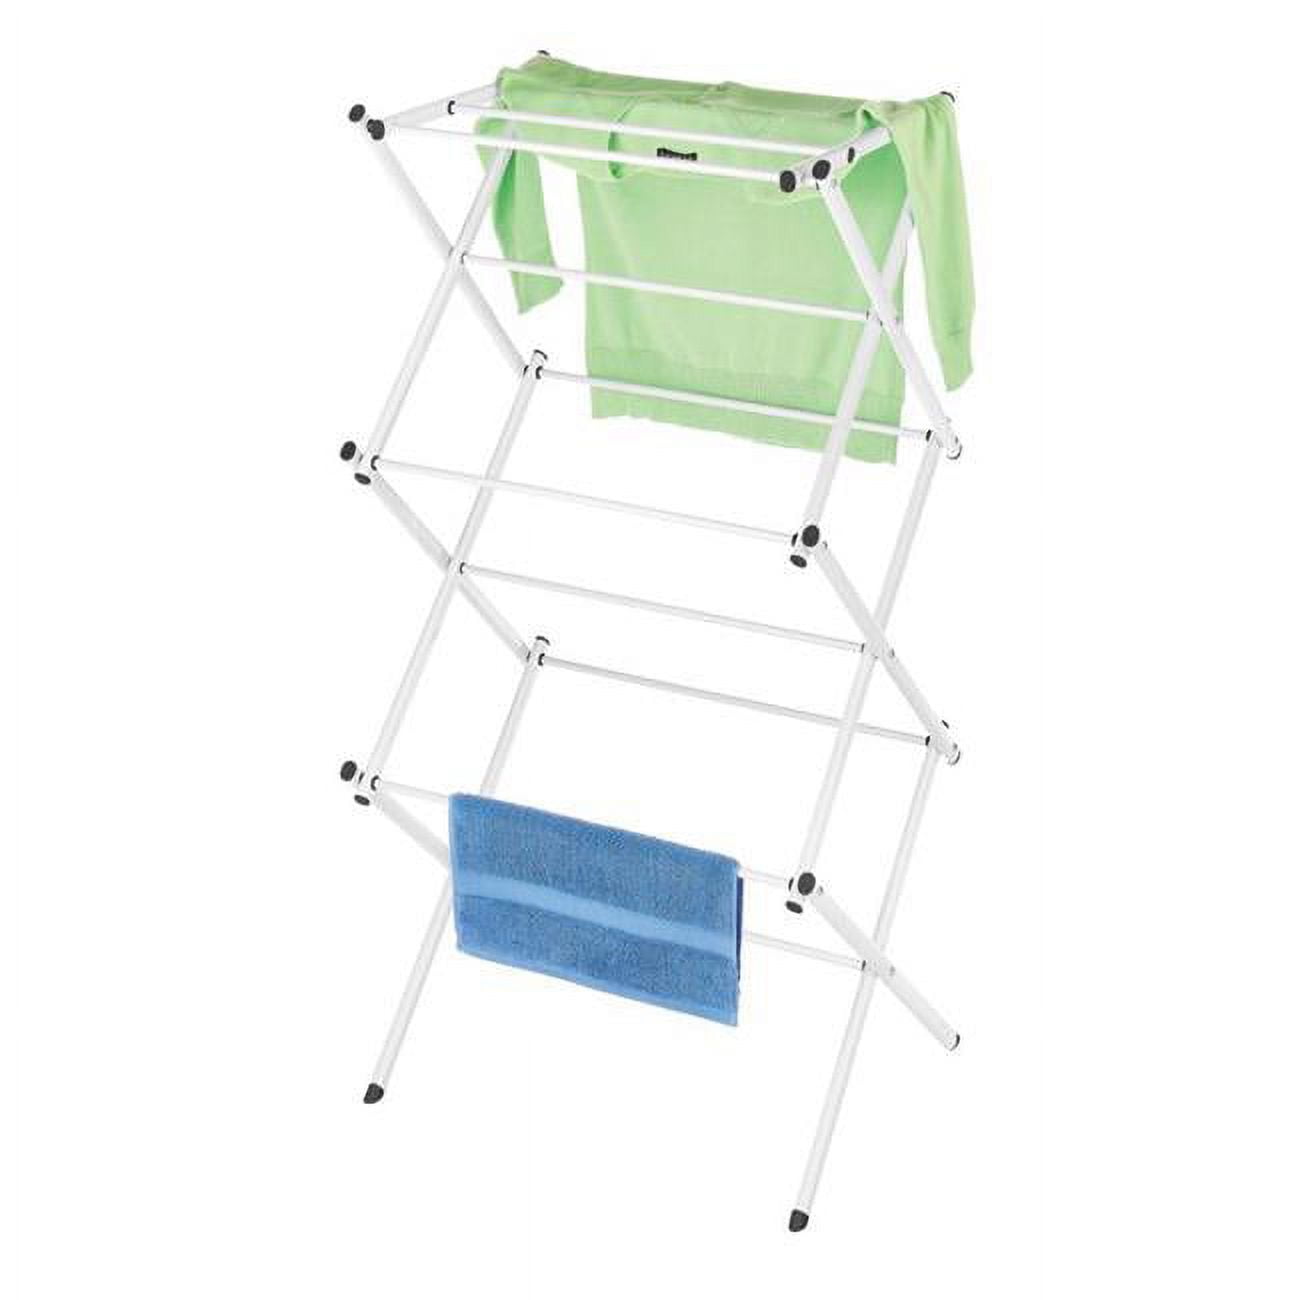 Clothes Drying Rack - Indoor/Outdoor Portable Laundry Rack - Collapsible Clothes Stand by Everyday Home (White)